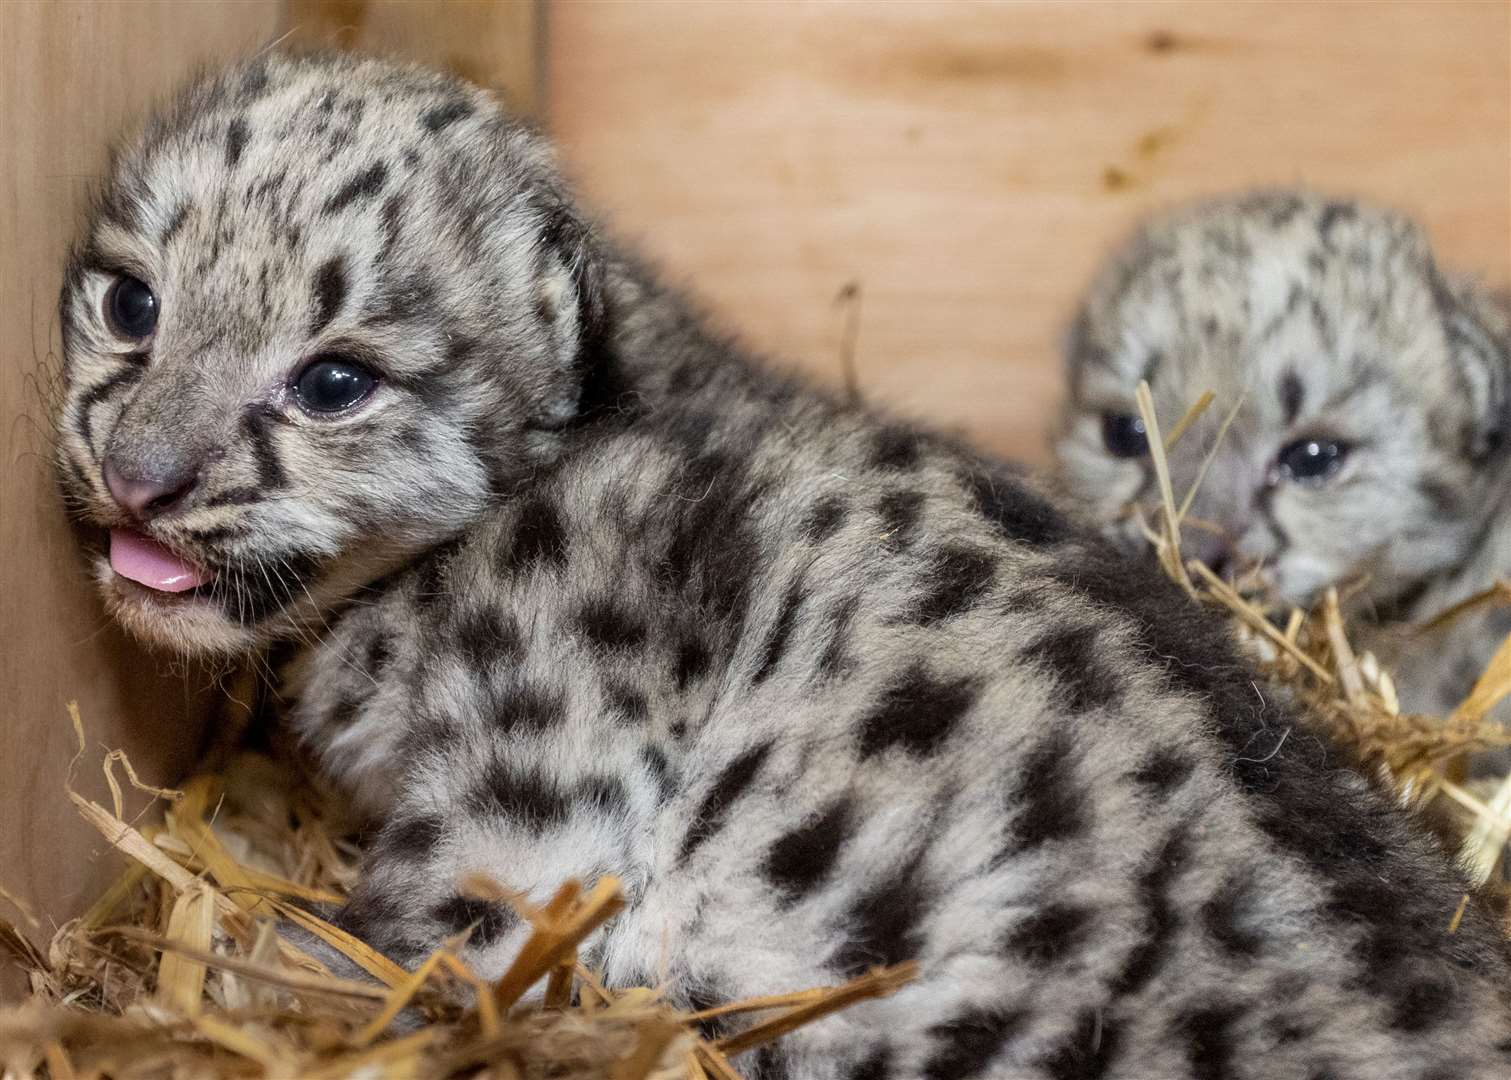 Spot and Stripe have been born at the Big Cat Sanctuary. Picture: Jack Valpy